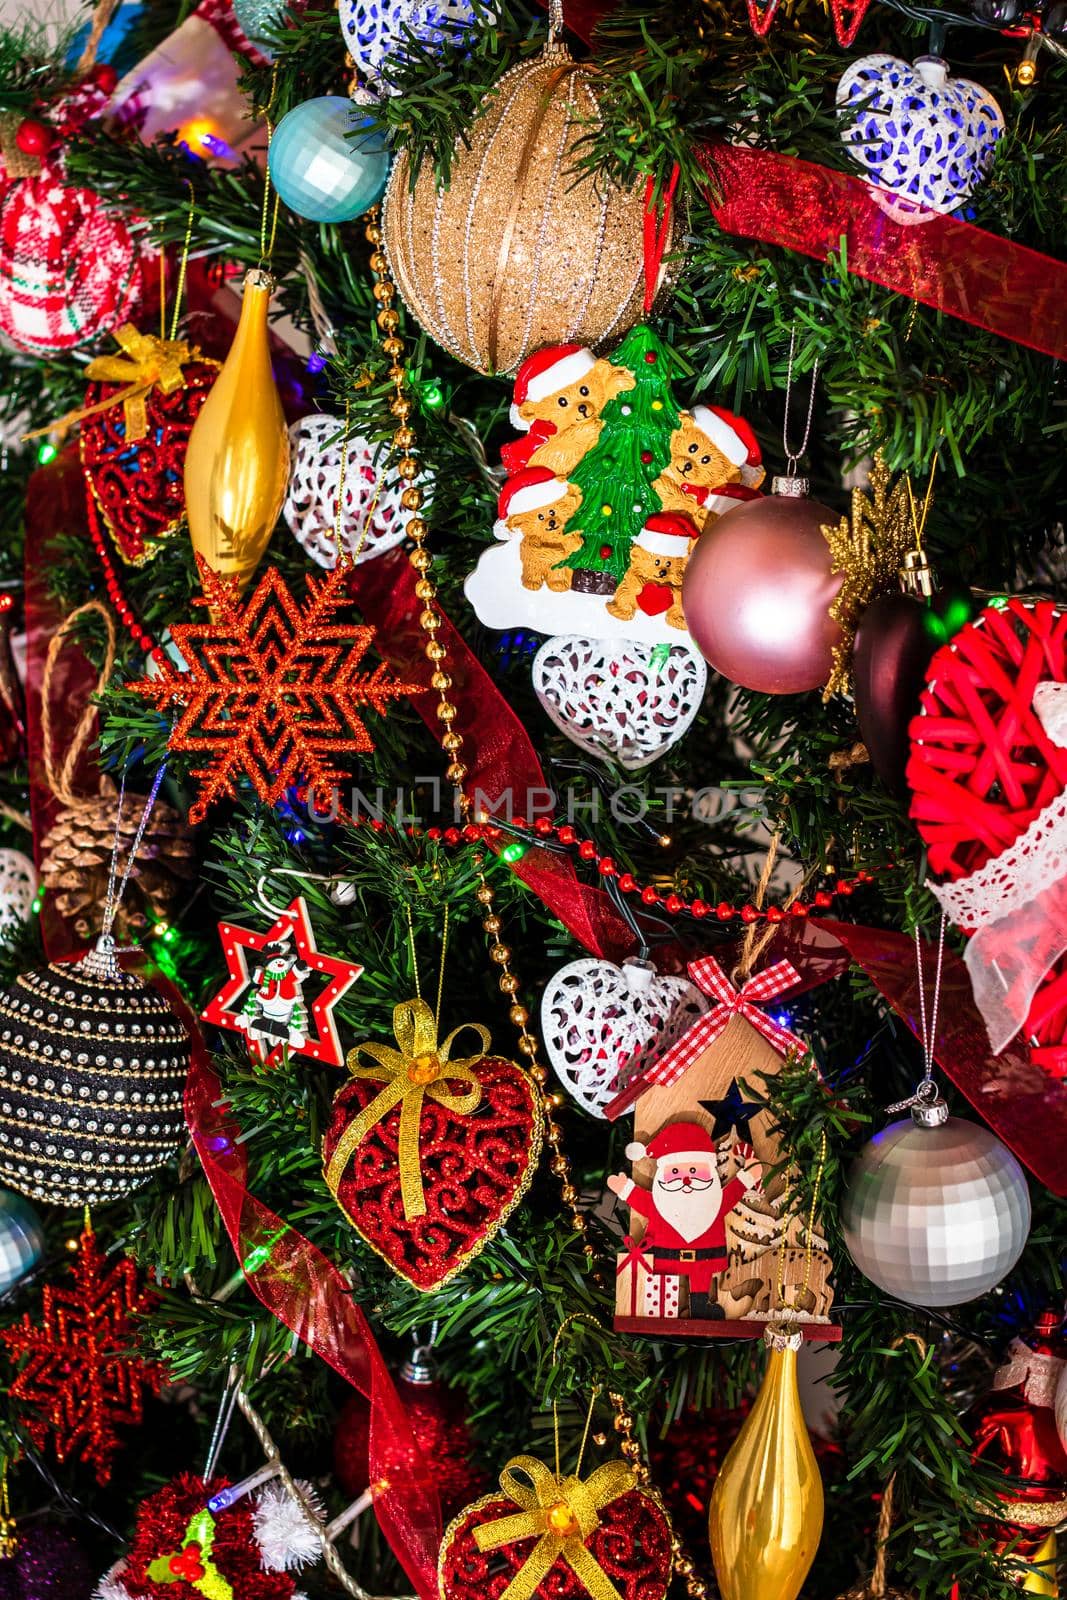 Beautiful Christmas ornaments and decorations hanging in the Christmas tree by vladispas